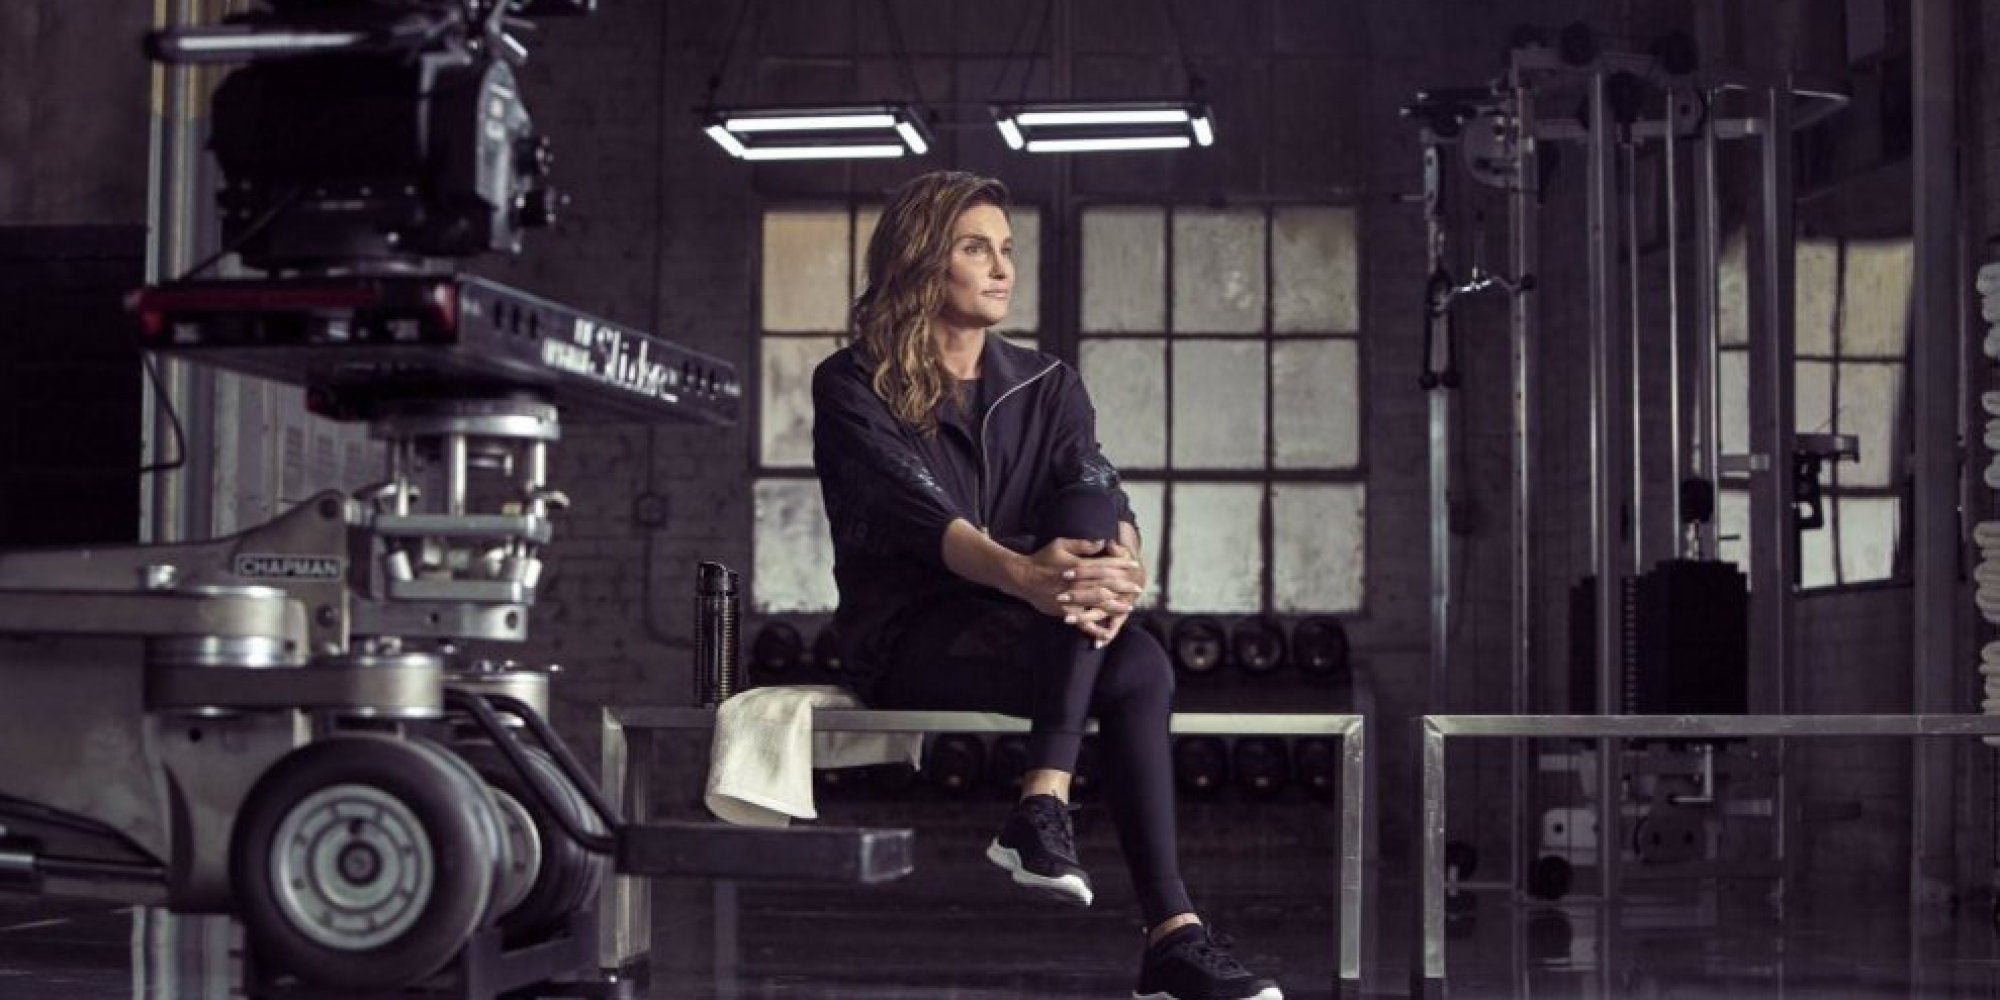 WOW!  The New Face of Athleisure H&M Is Caitlyn Jenner!